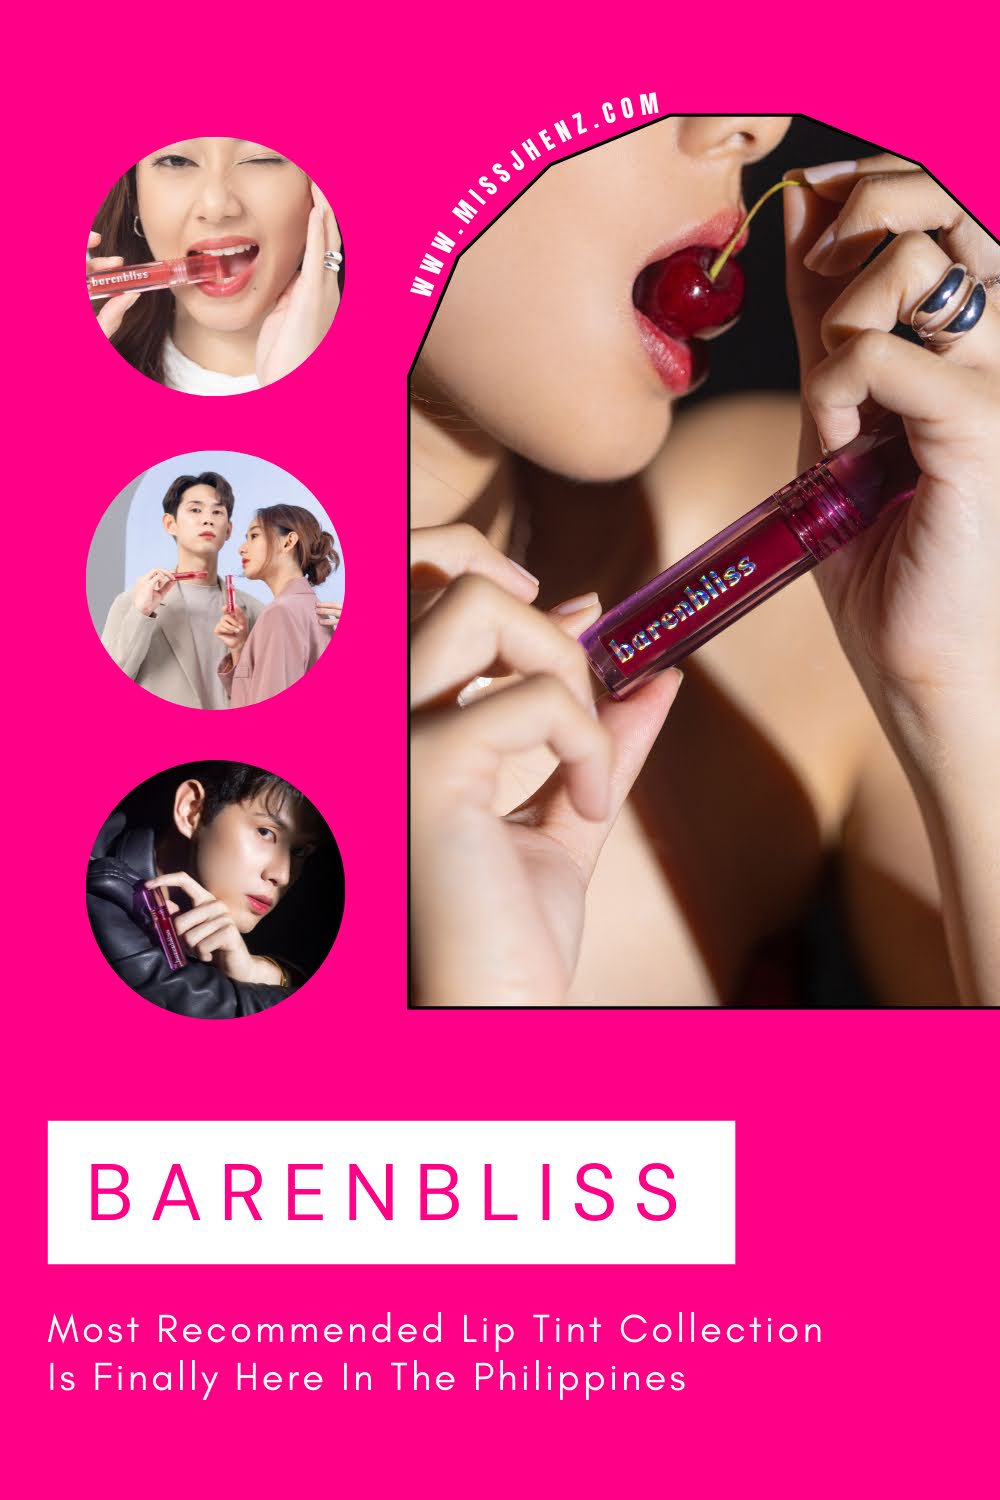 This barenbliss’s Most Recommended Lip Tint Collection is Finally here in the Philippines